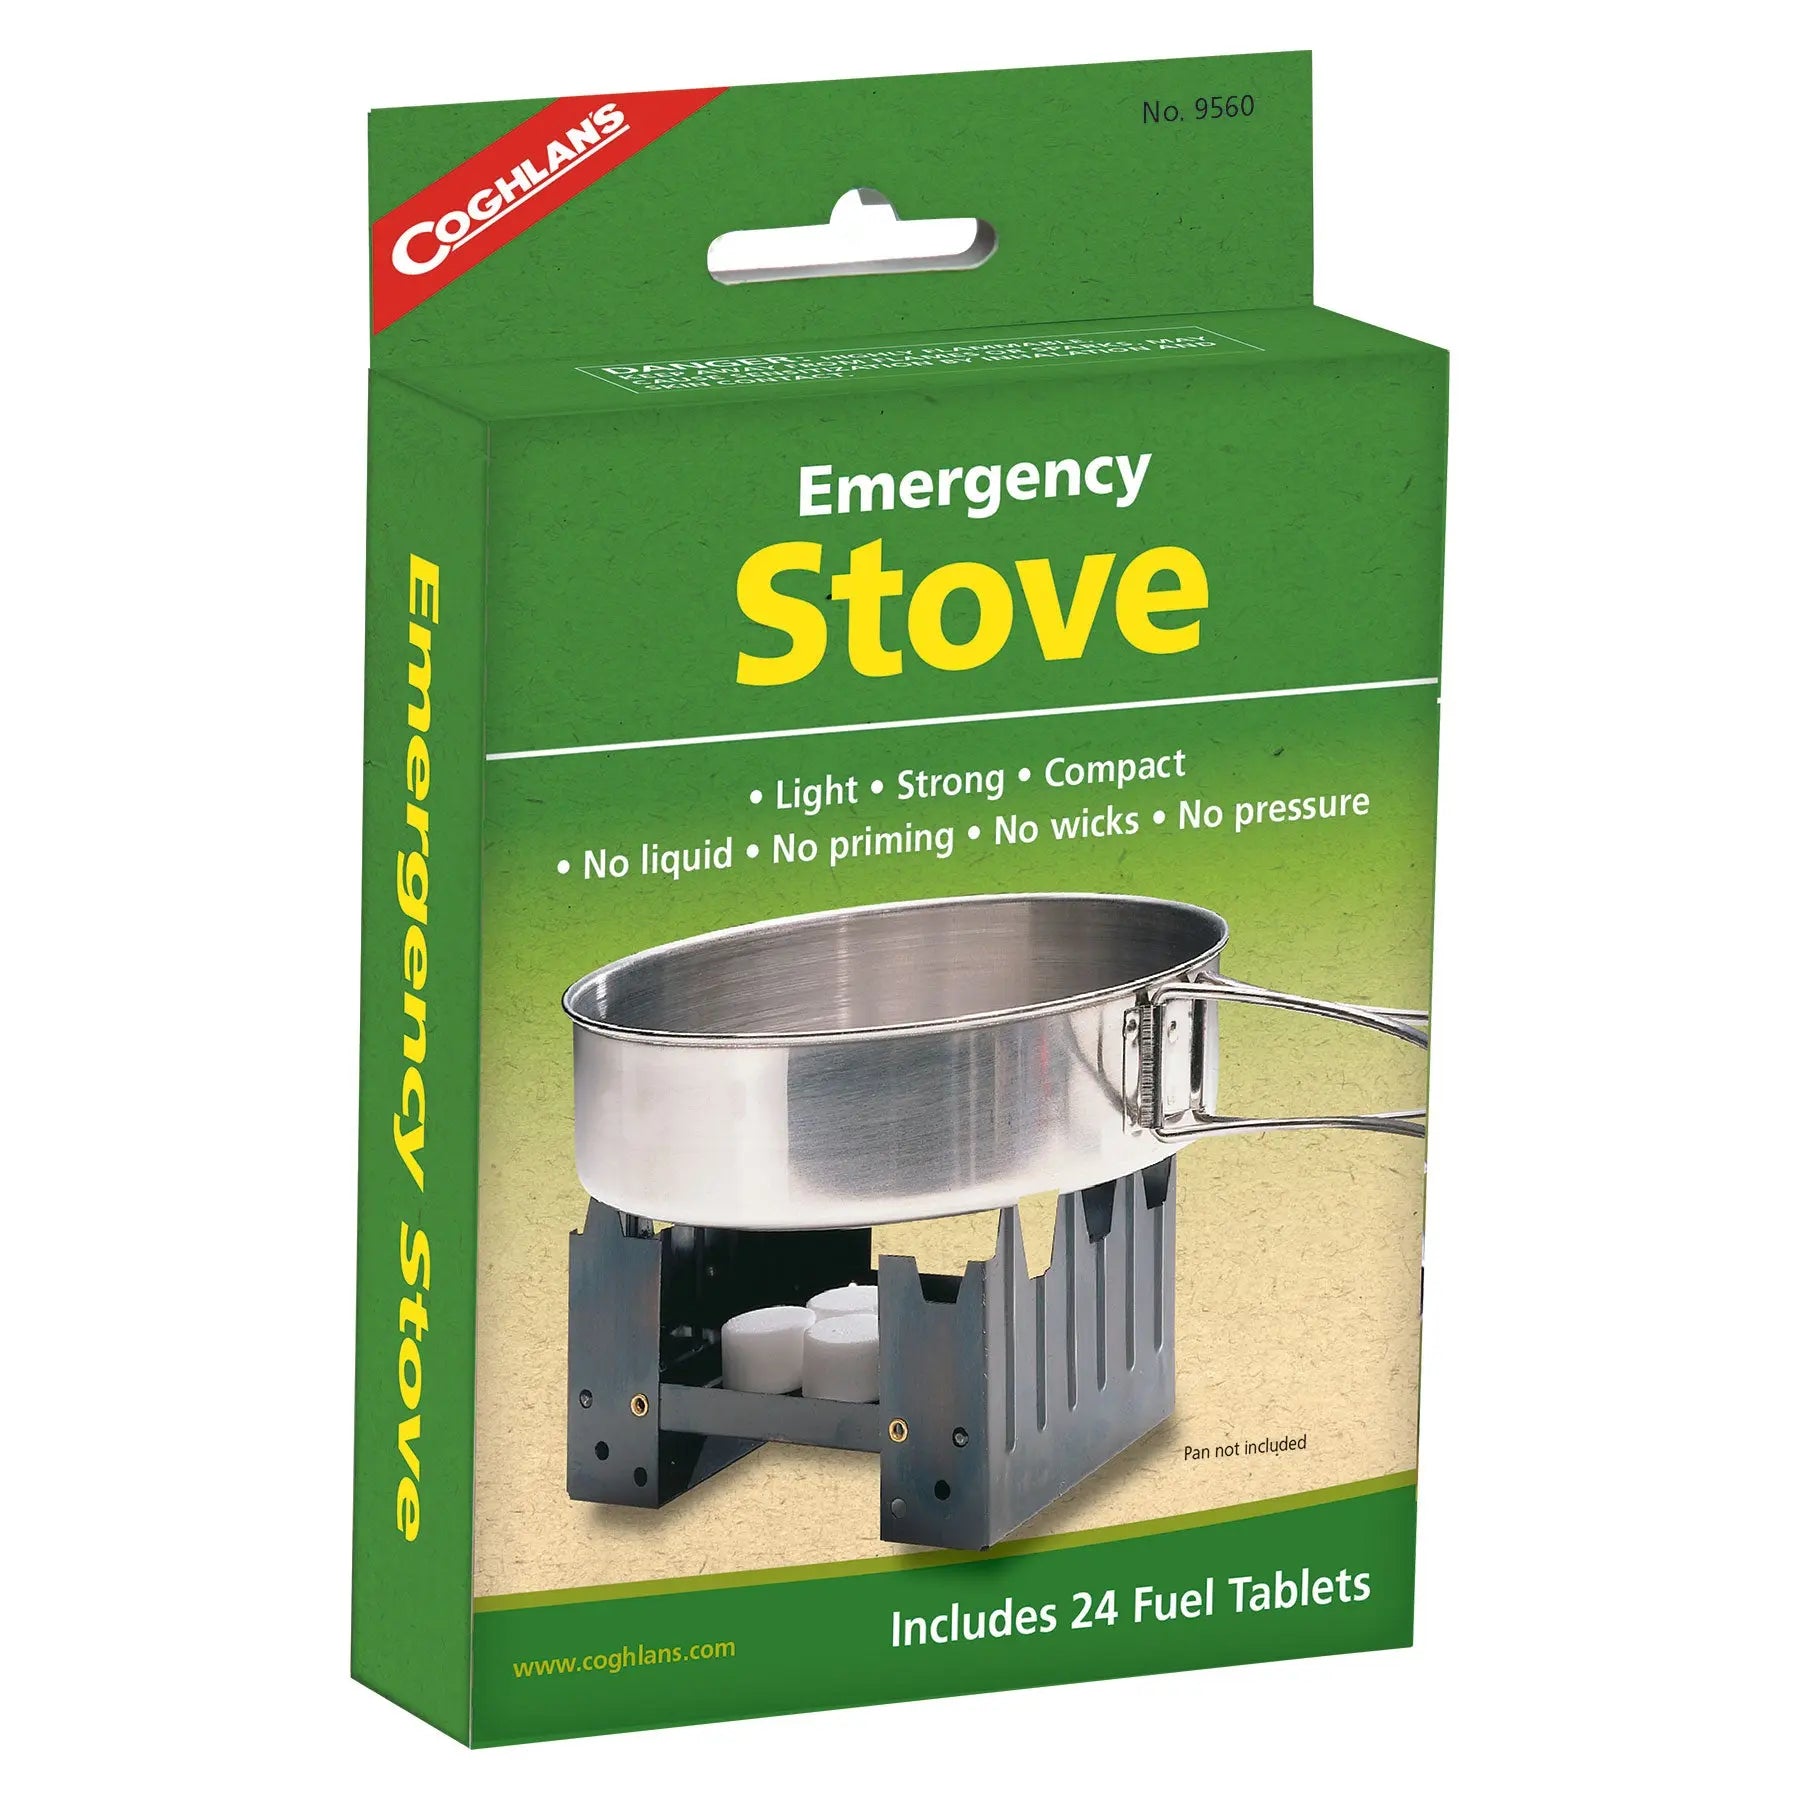 Portable Stove with 8 Fuel Tablets - First Aid Market